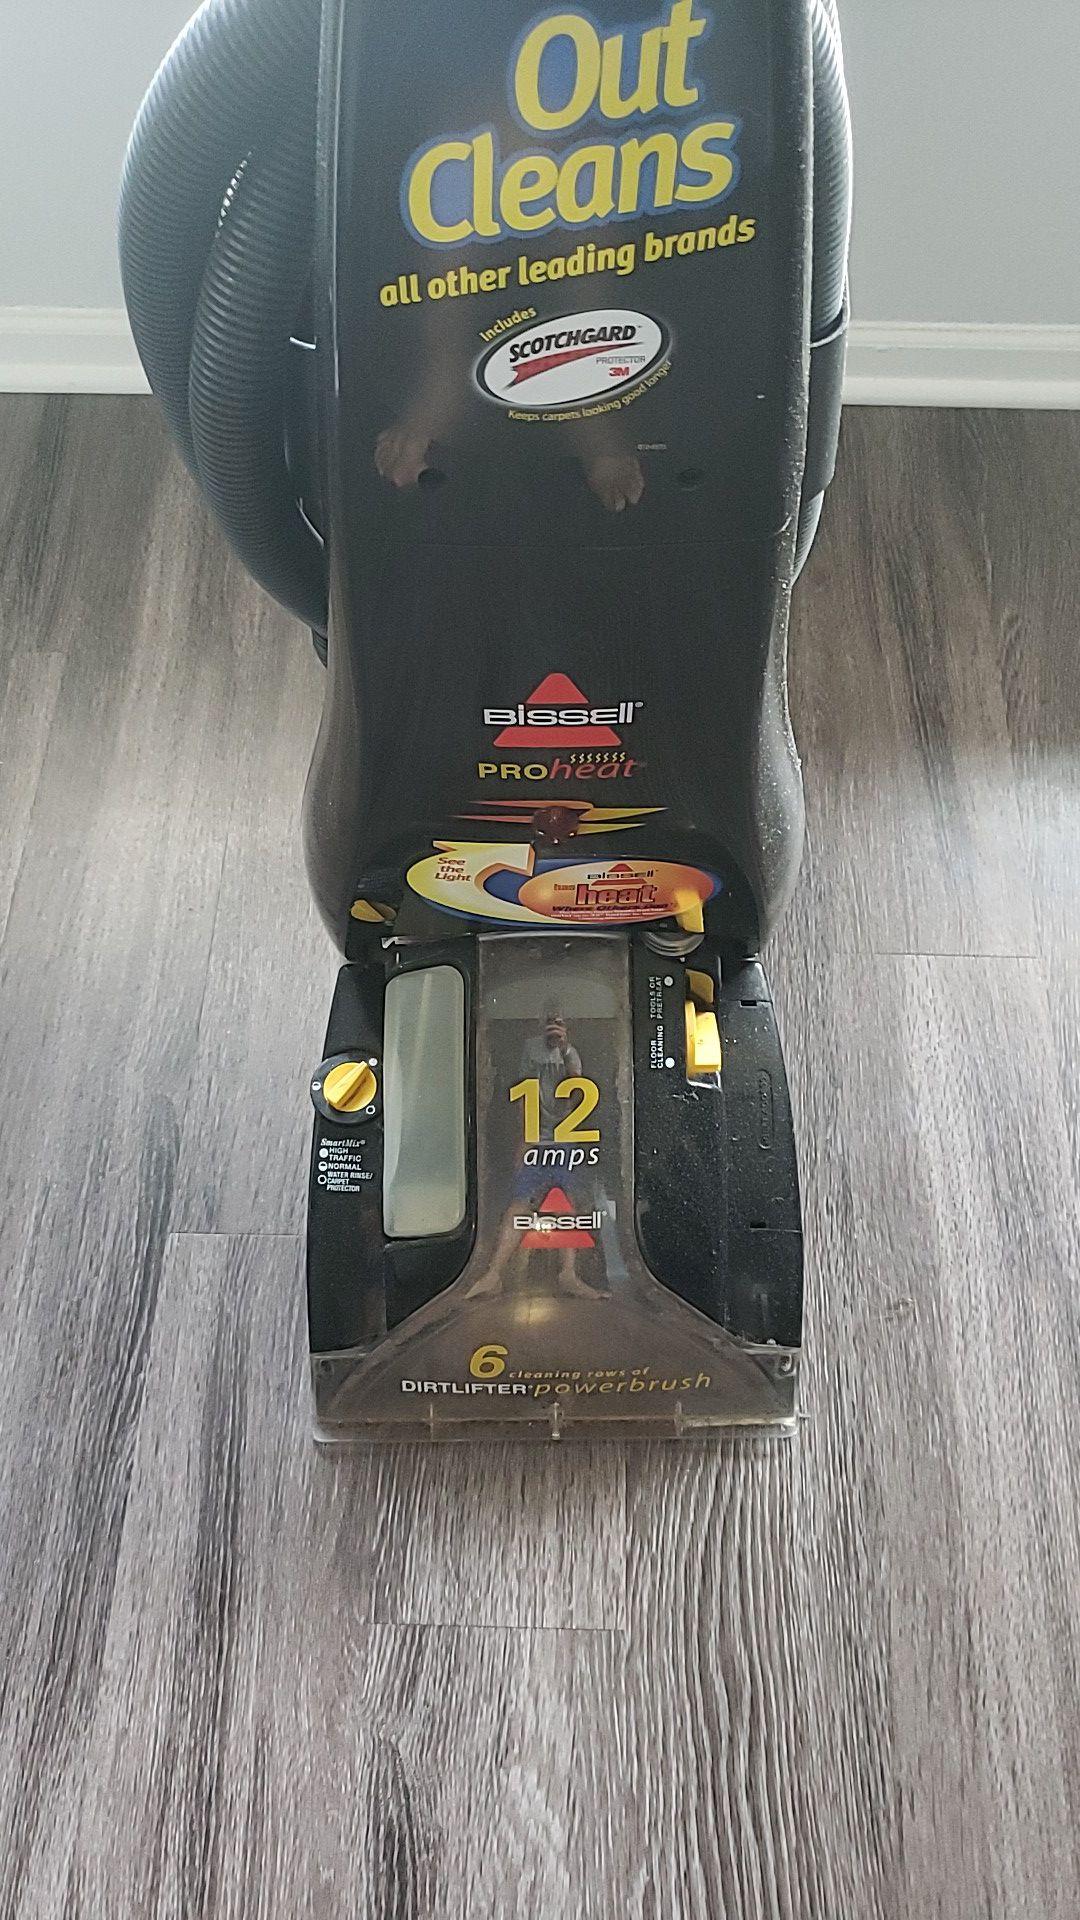 $125 OBO: Bissell Pro Heat Carpet Cleaner